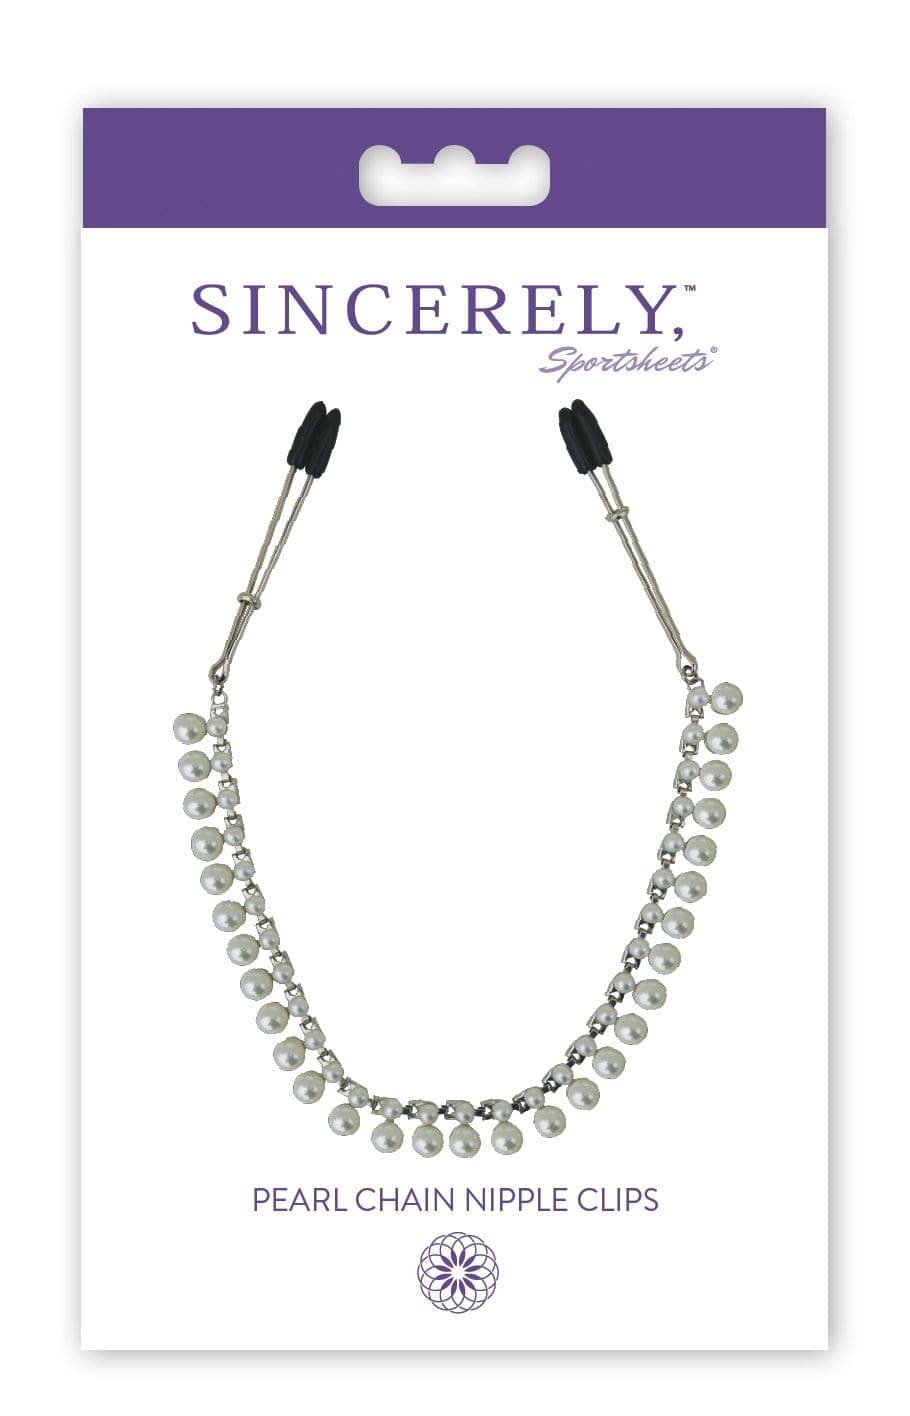 sincerely pearl chain nipple clips